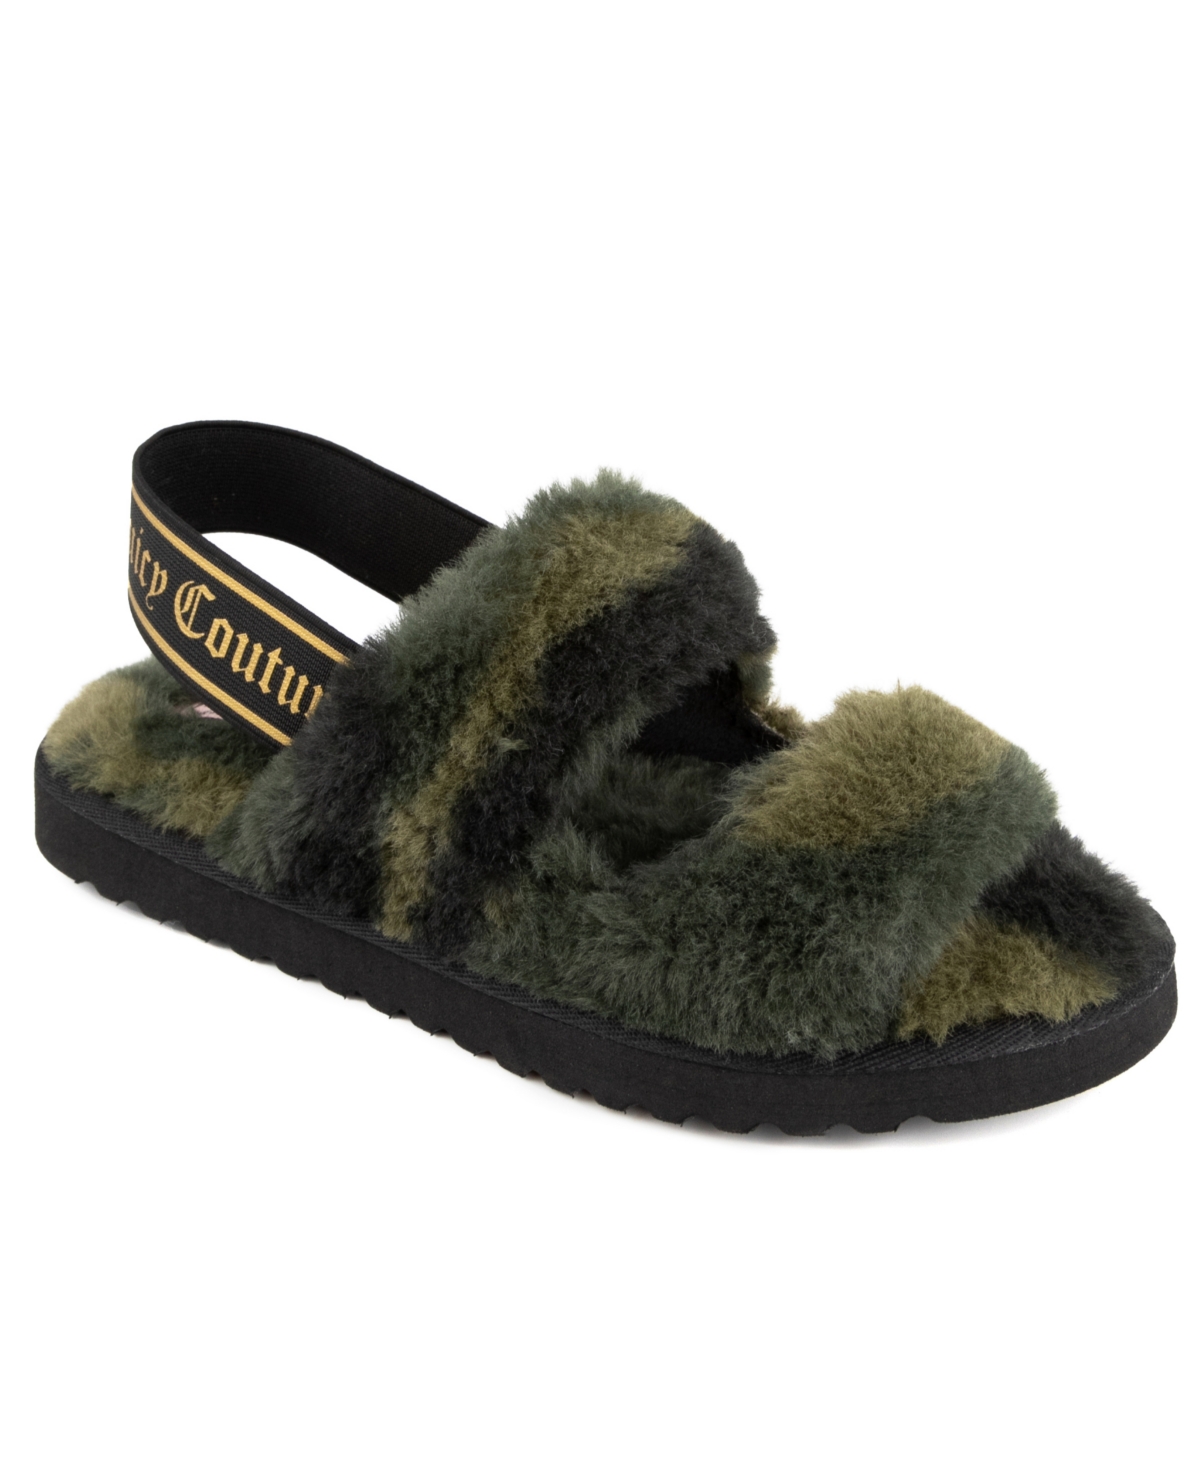 Women's Greer Slippers - Camouflage